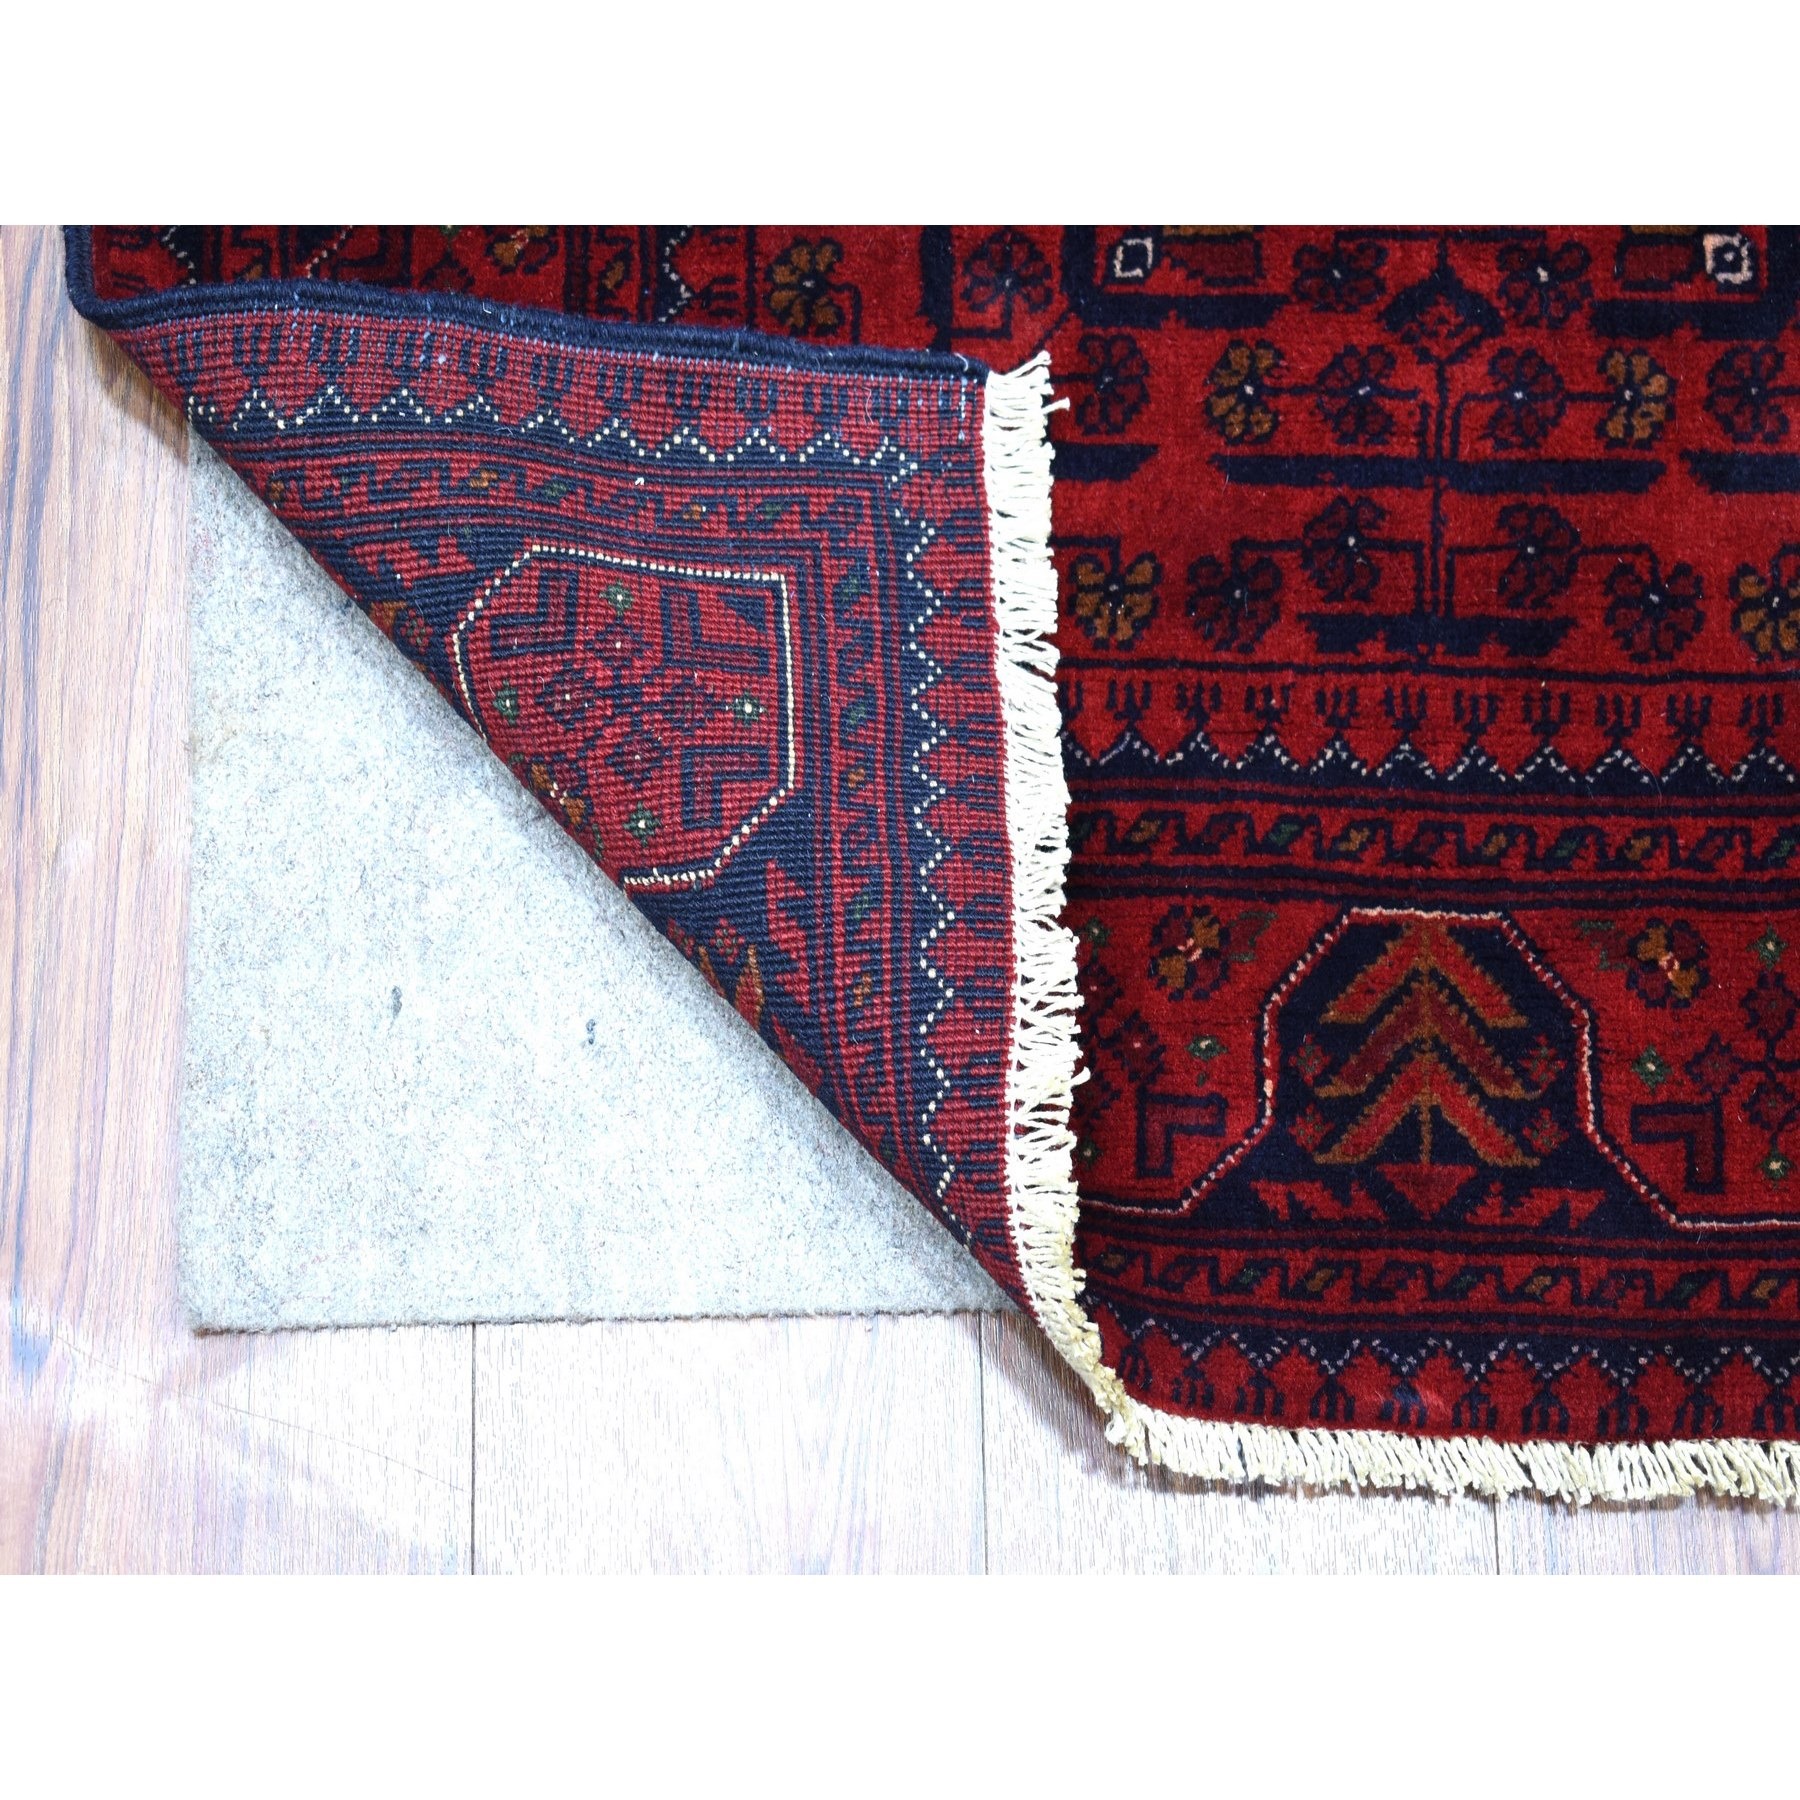 2'8"x4' Deep and Saturated Red Organic and Soft Wool Hand Woven Geometric Design Afghan Khamyab Oriental Rug 